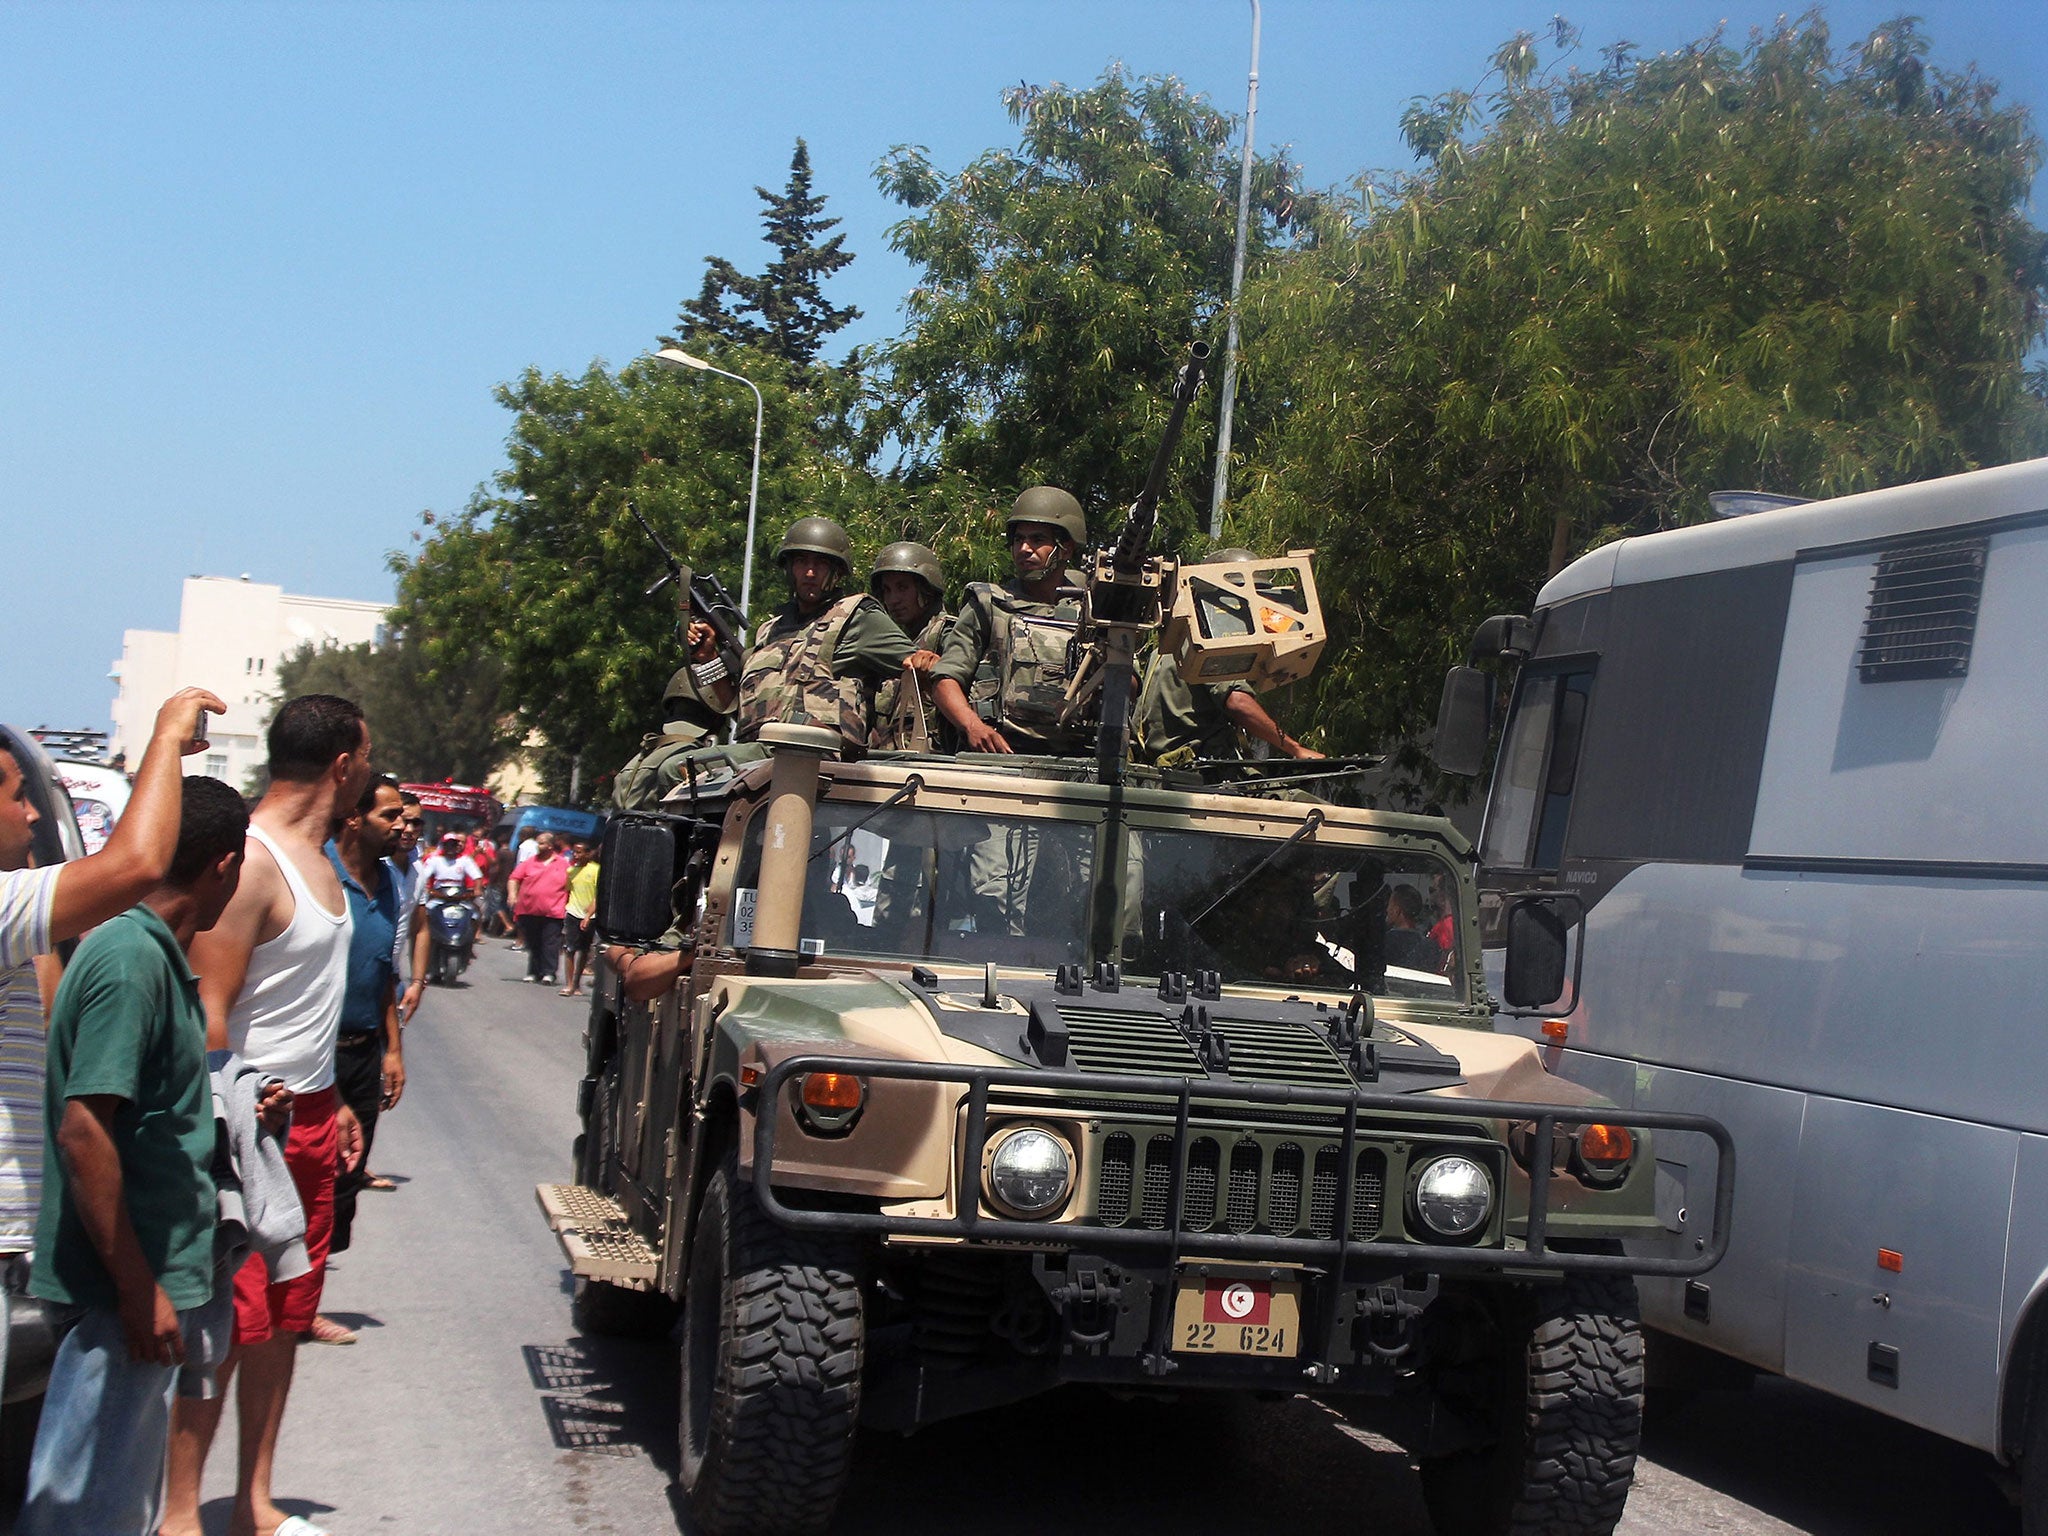 Members of the Tunisian security forces in an amroured vehicle patrol a street in al-Sousse